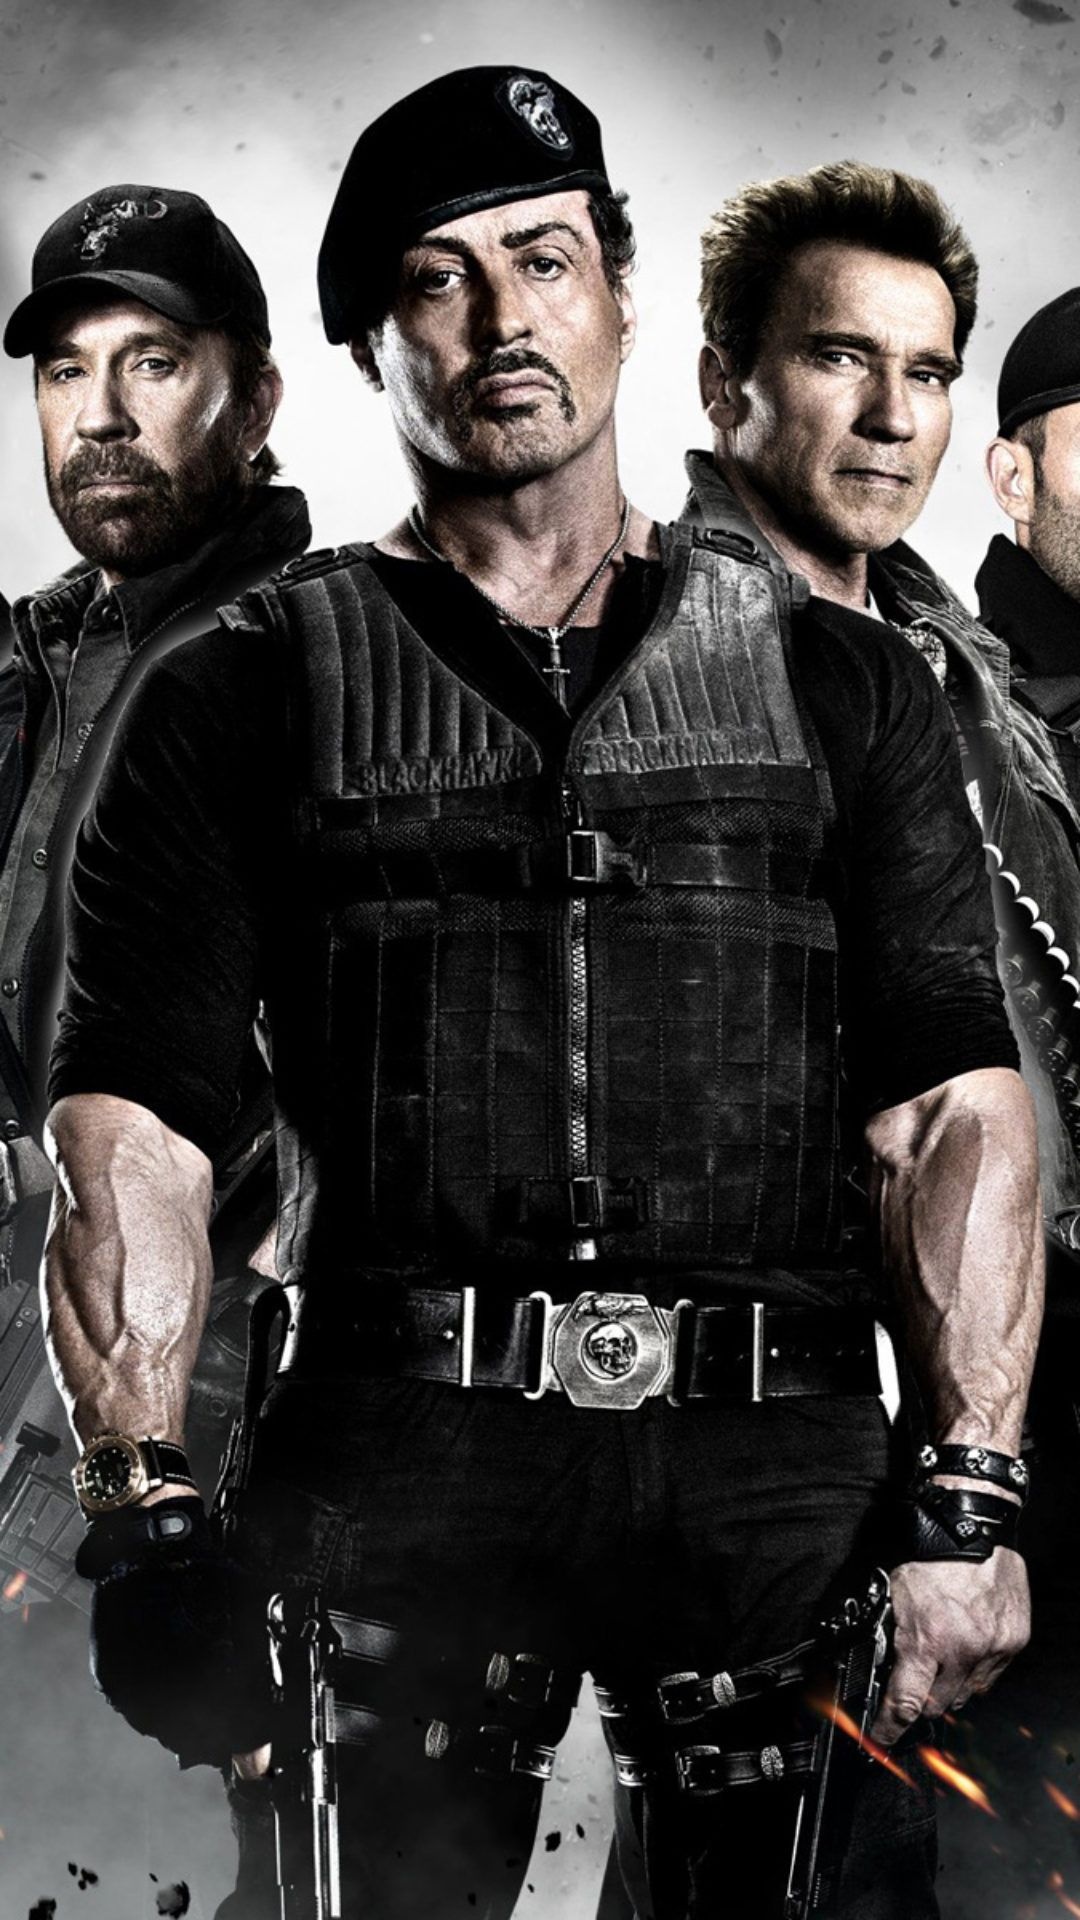 The Expendables, Action-filled wallpapers, Thrilling backgrounds, Iconic movie scenes, 1080x1920 Full HD Phone